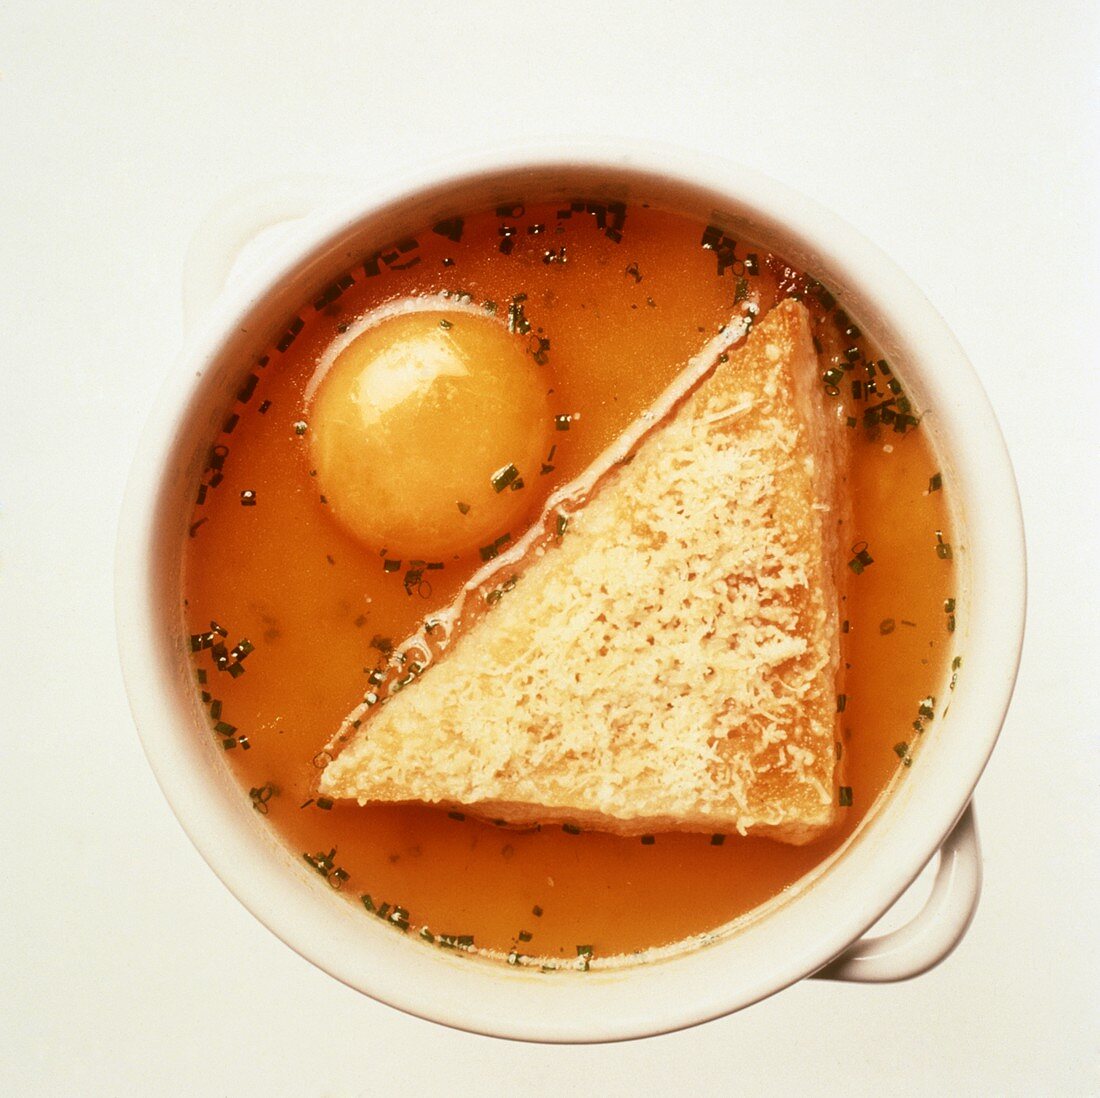 Zuppa pavese (clear broth with raw egg yolk), Italy